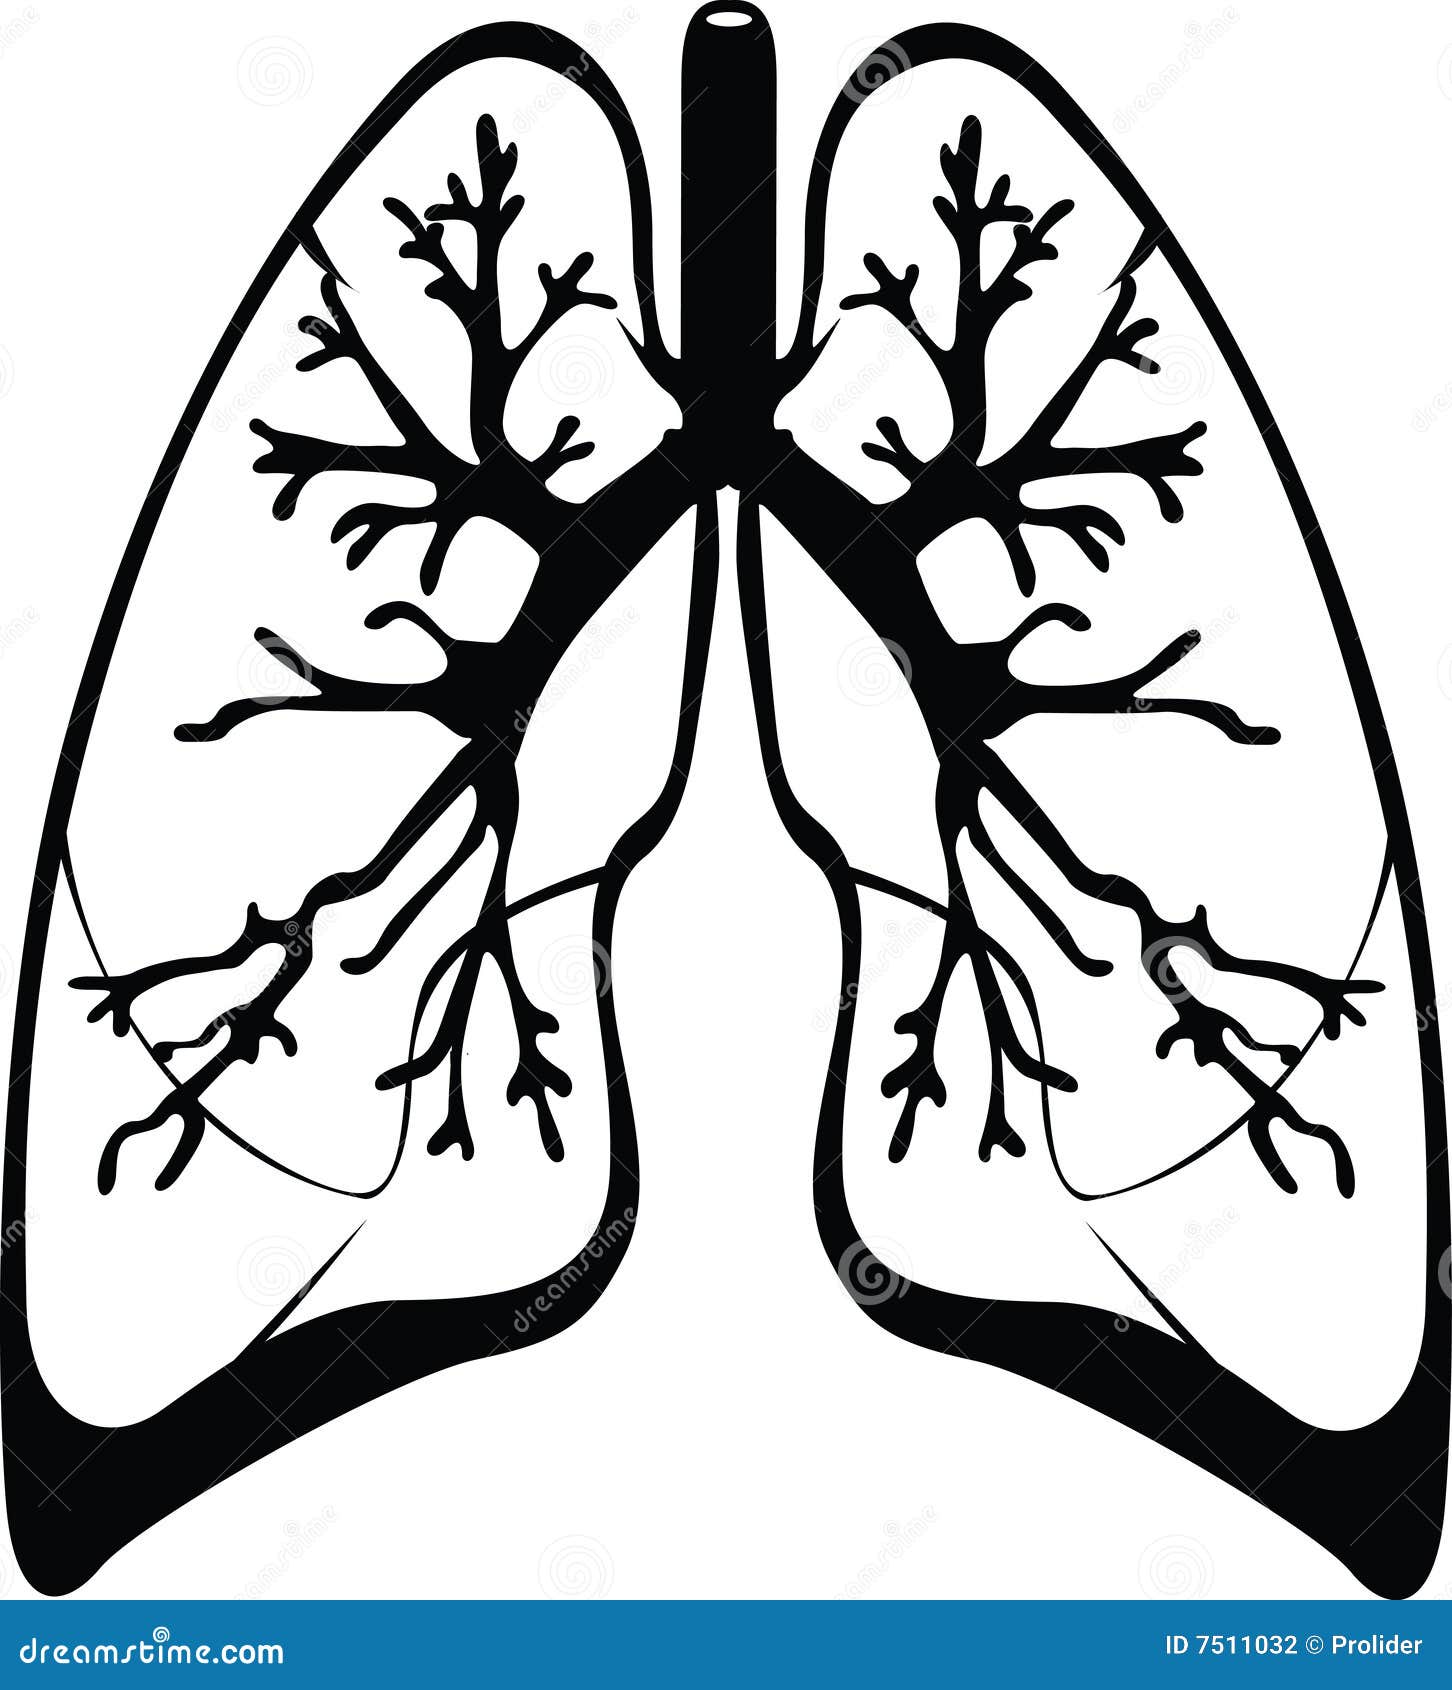 lungs clipart vector - photo #46